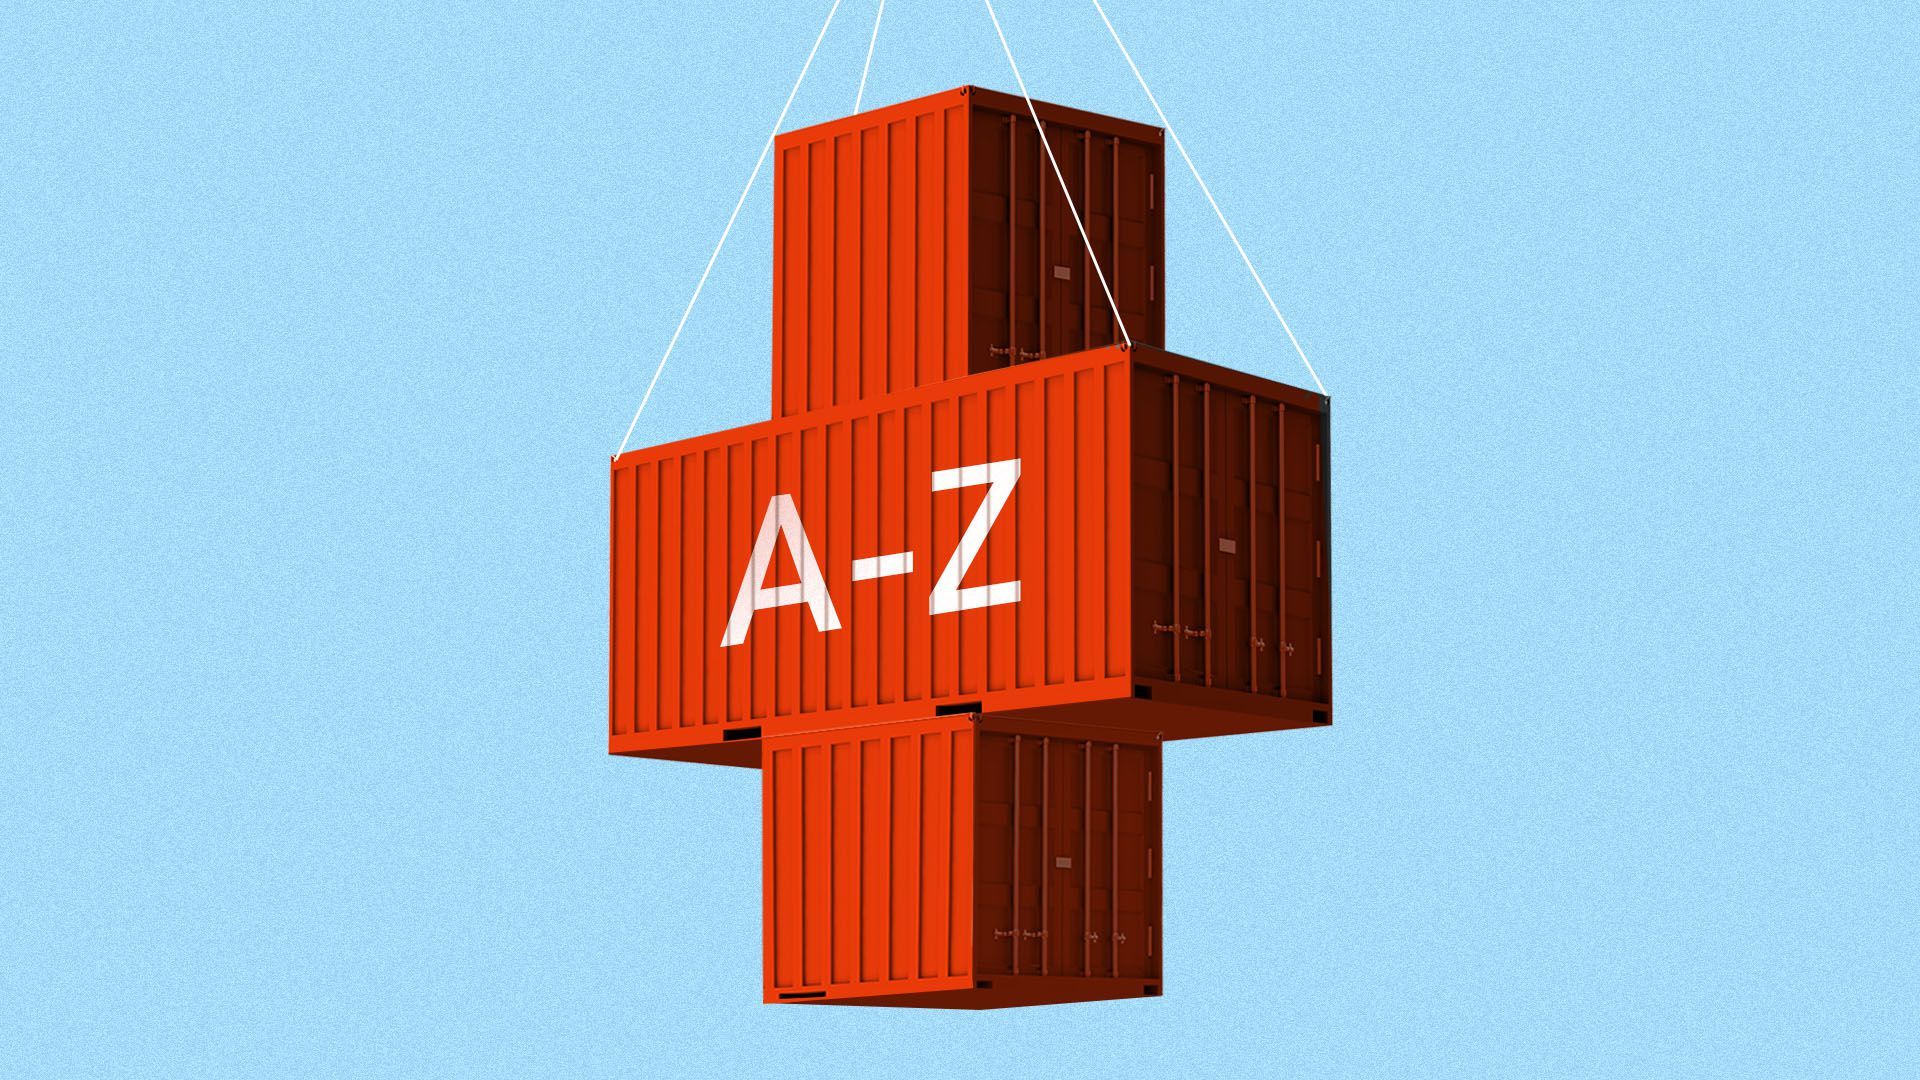 Illustration of a shipping container in the shape of a red cross with "AZ" written on it